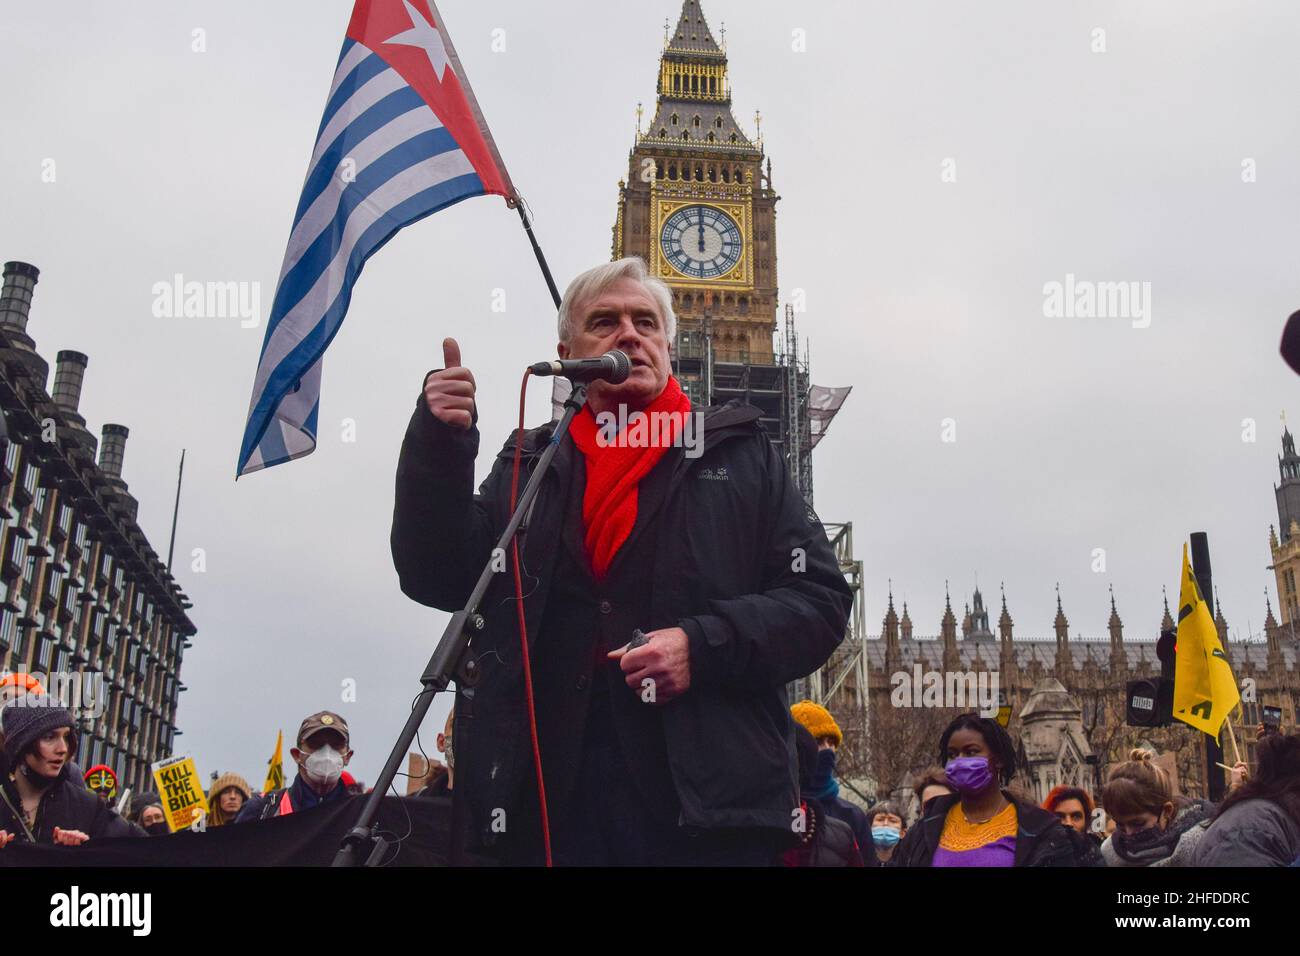 London, UK 15th January 2022. Labour MP John McDonnell speaks in Parliament Square during the Kill The Bill protest. Thousands of people marched through central London in protest against the Police, Crime, Sentencing and Courts Bill, which will make many types of protest illegal. Credit: Vuk Valcic / Alamy Live News Stock Photo